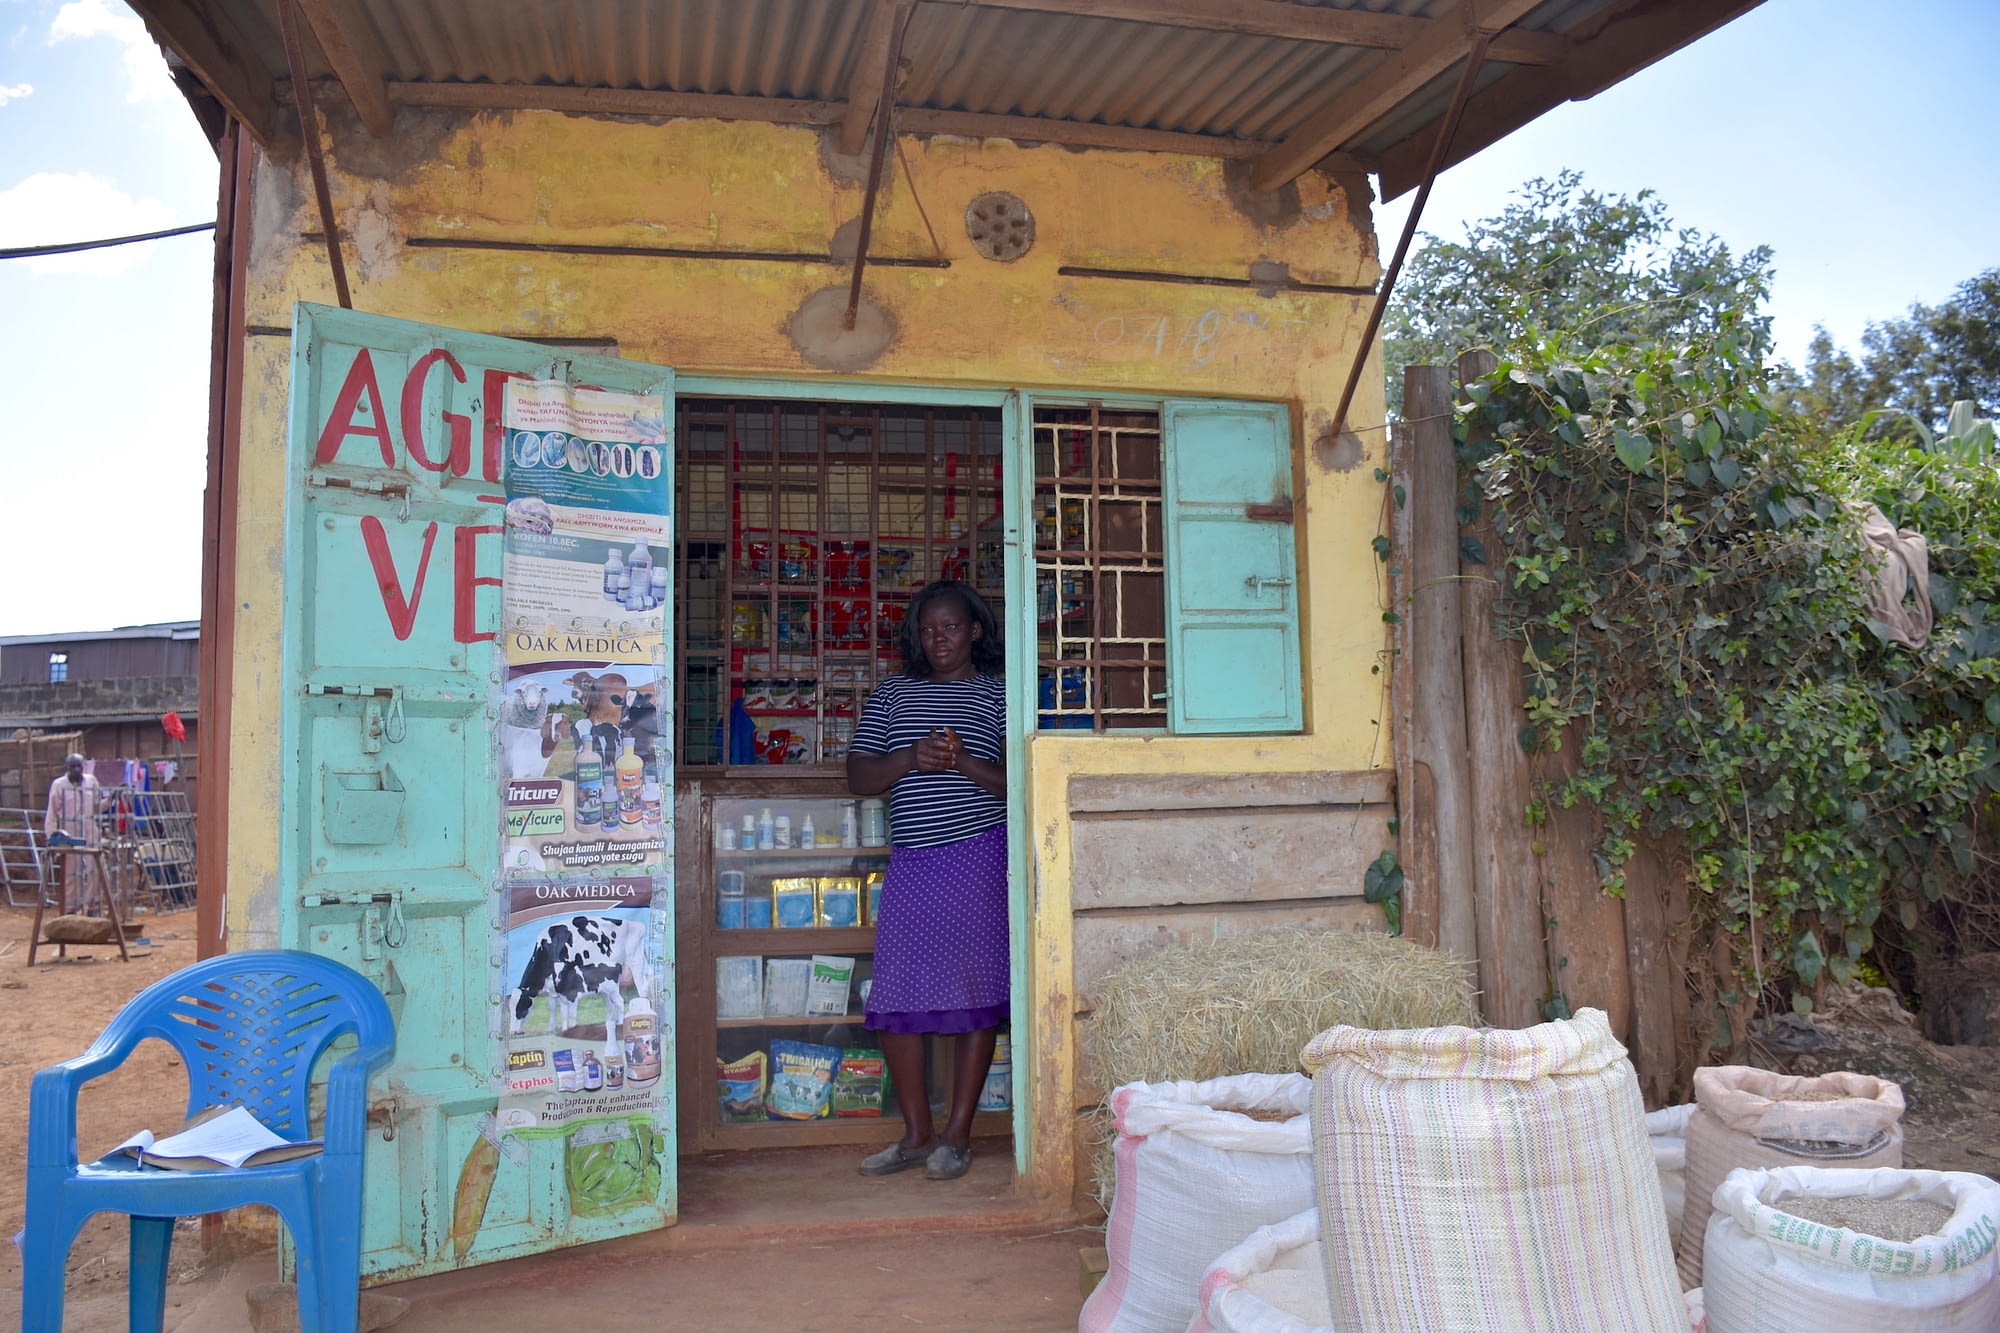 Philomena Muthoni Mwangi stands at the entrance of her agrodealer shop, Farm Care, in the village of Ngarariga. (Photo: Jerome Bossuet/CIMMYT)